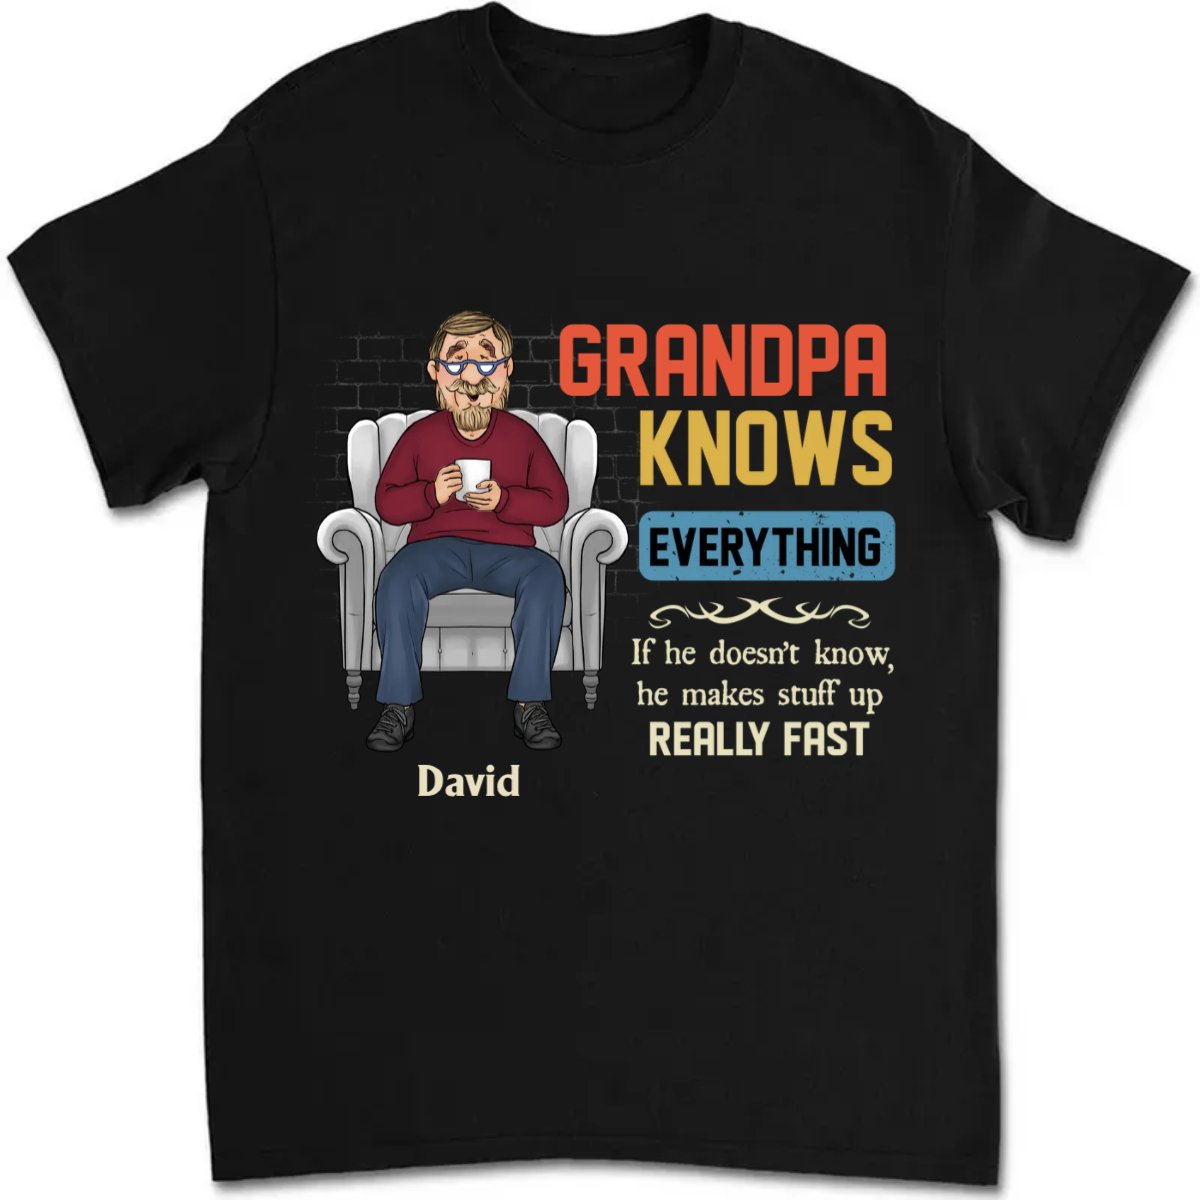 Grandpa - Knows Everything - Personalized Unisex T - shirt - The Next Custom Gift